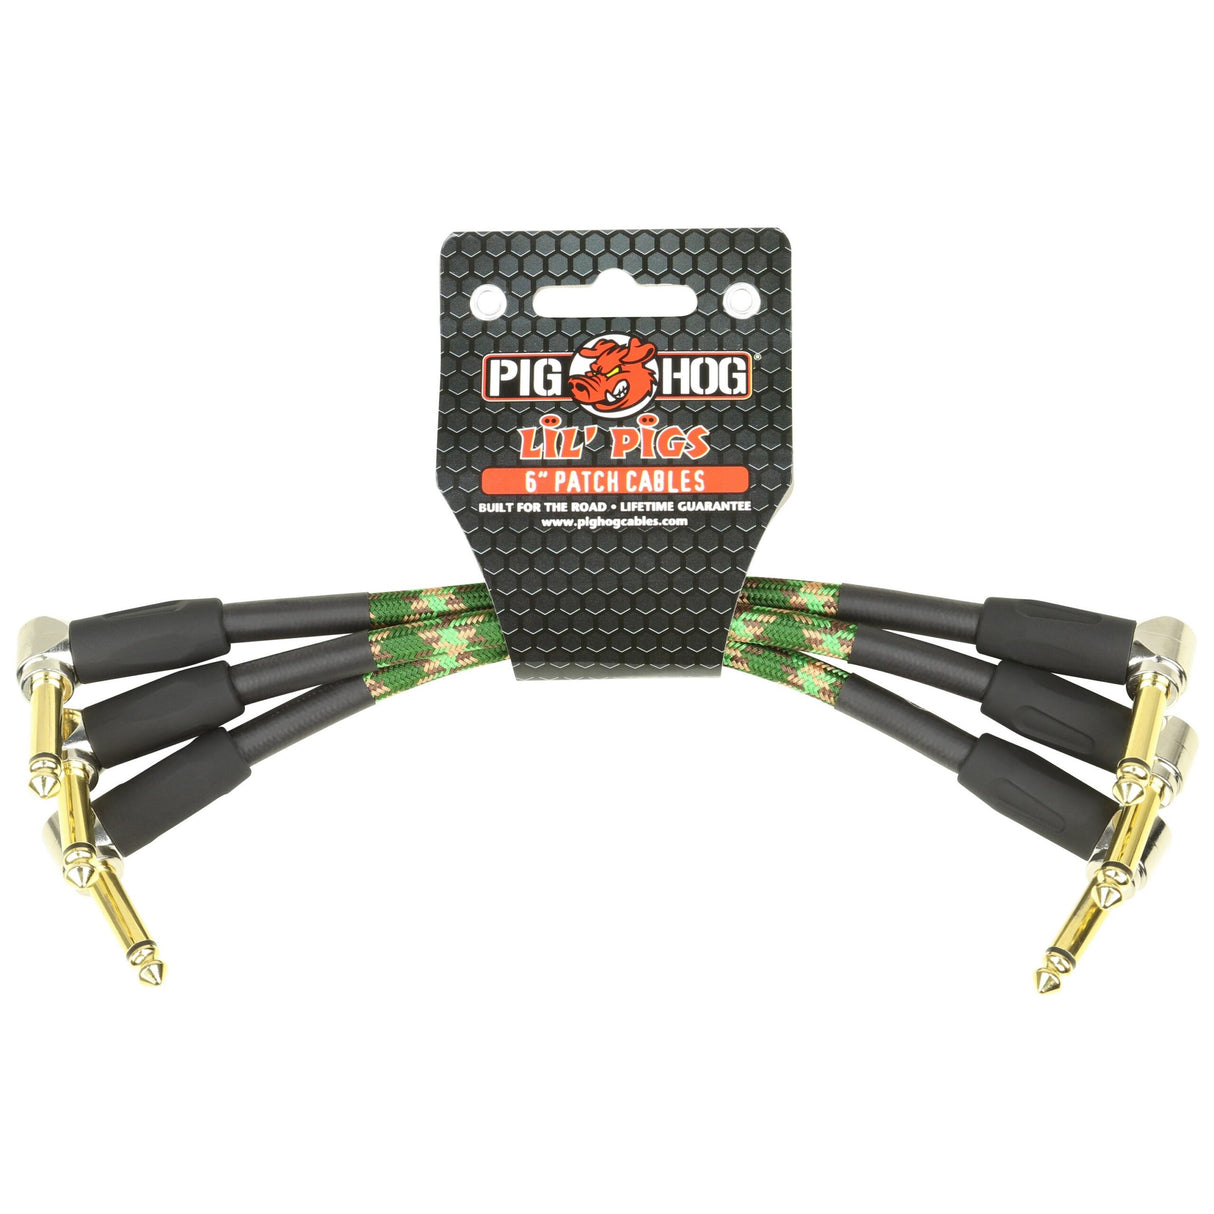 Pig Hog PHLIL6CF "Camouflage" 6-Inch Patch Cables, 3-Pack